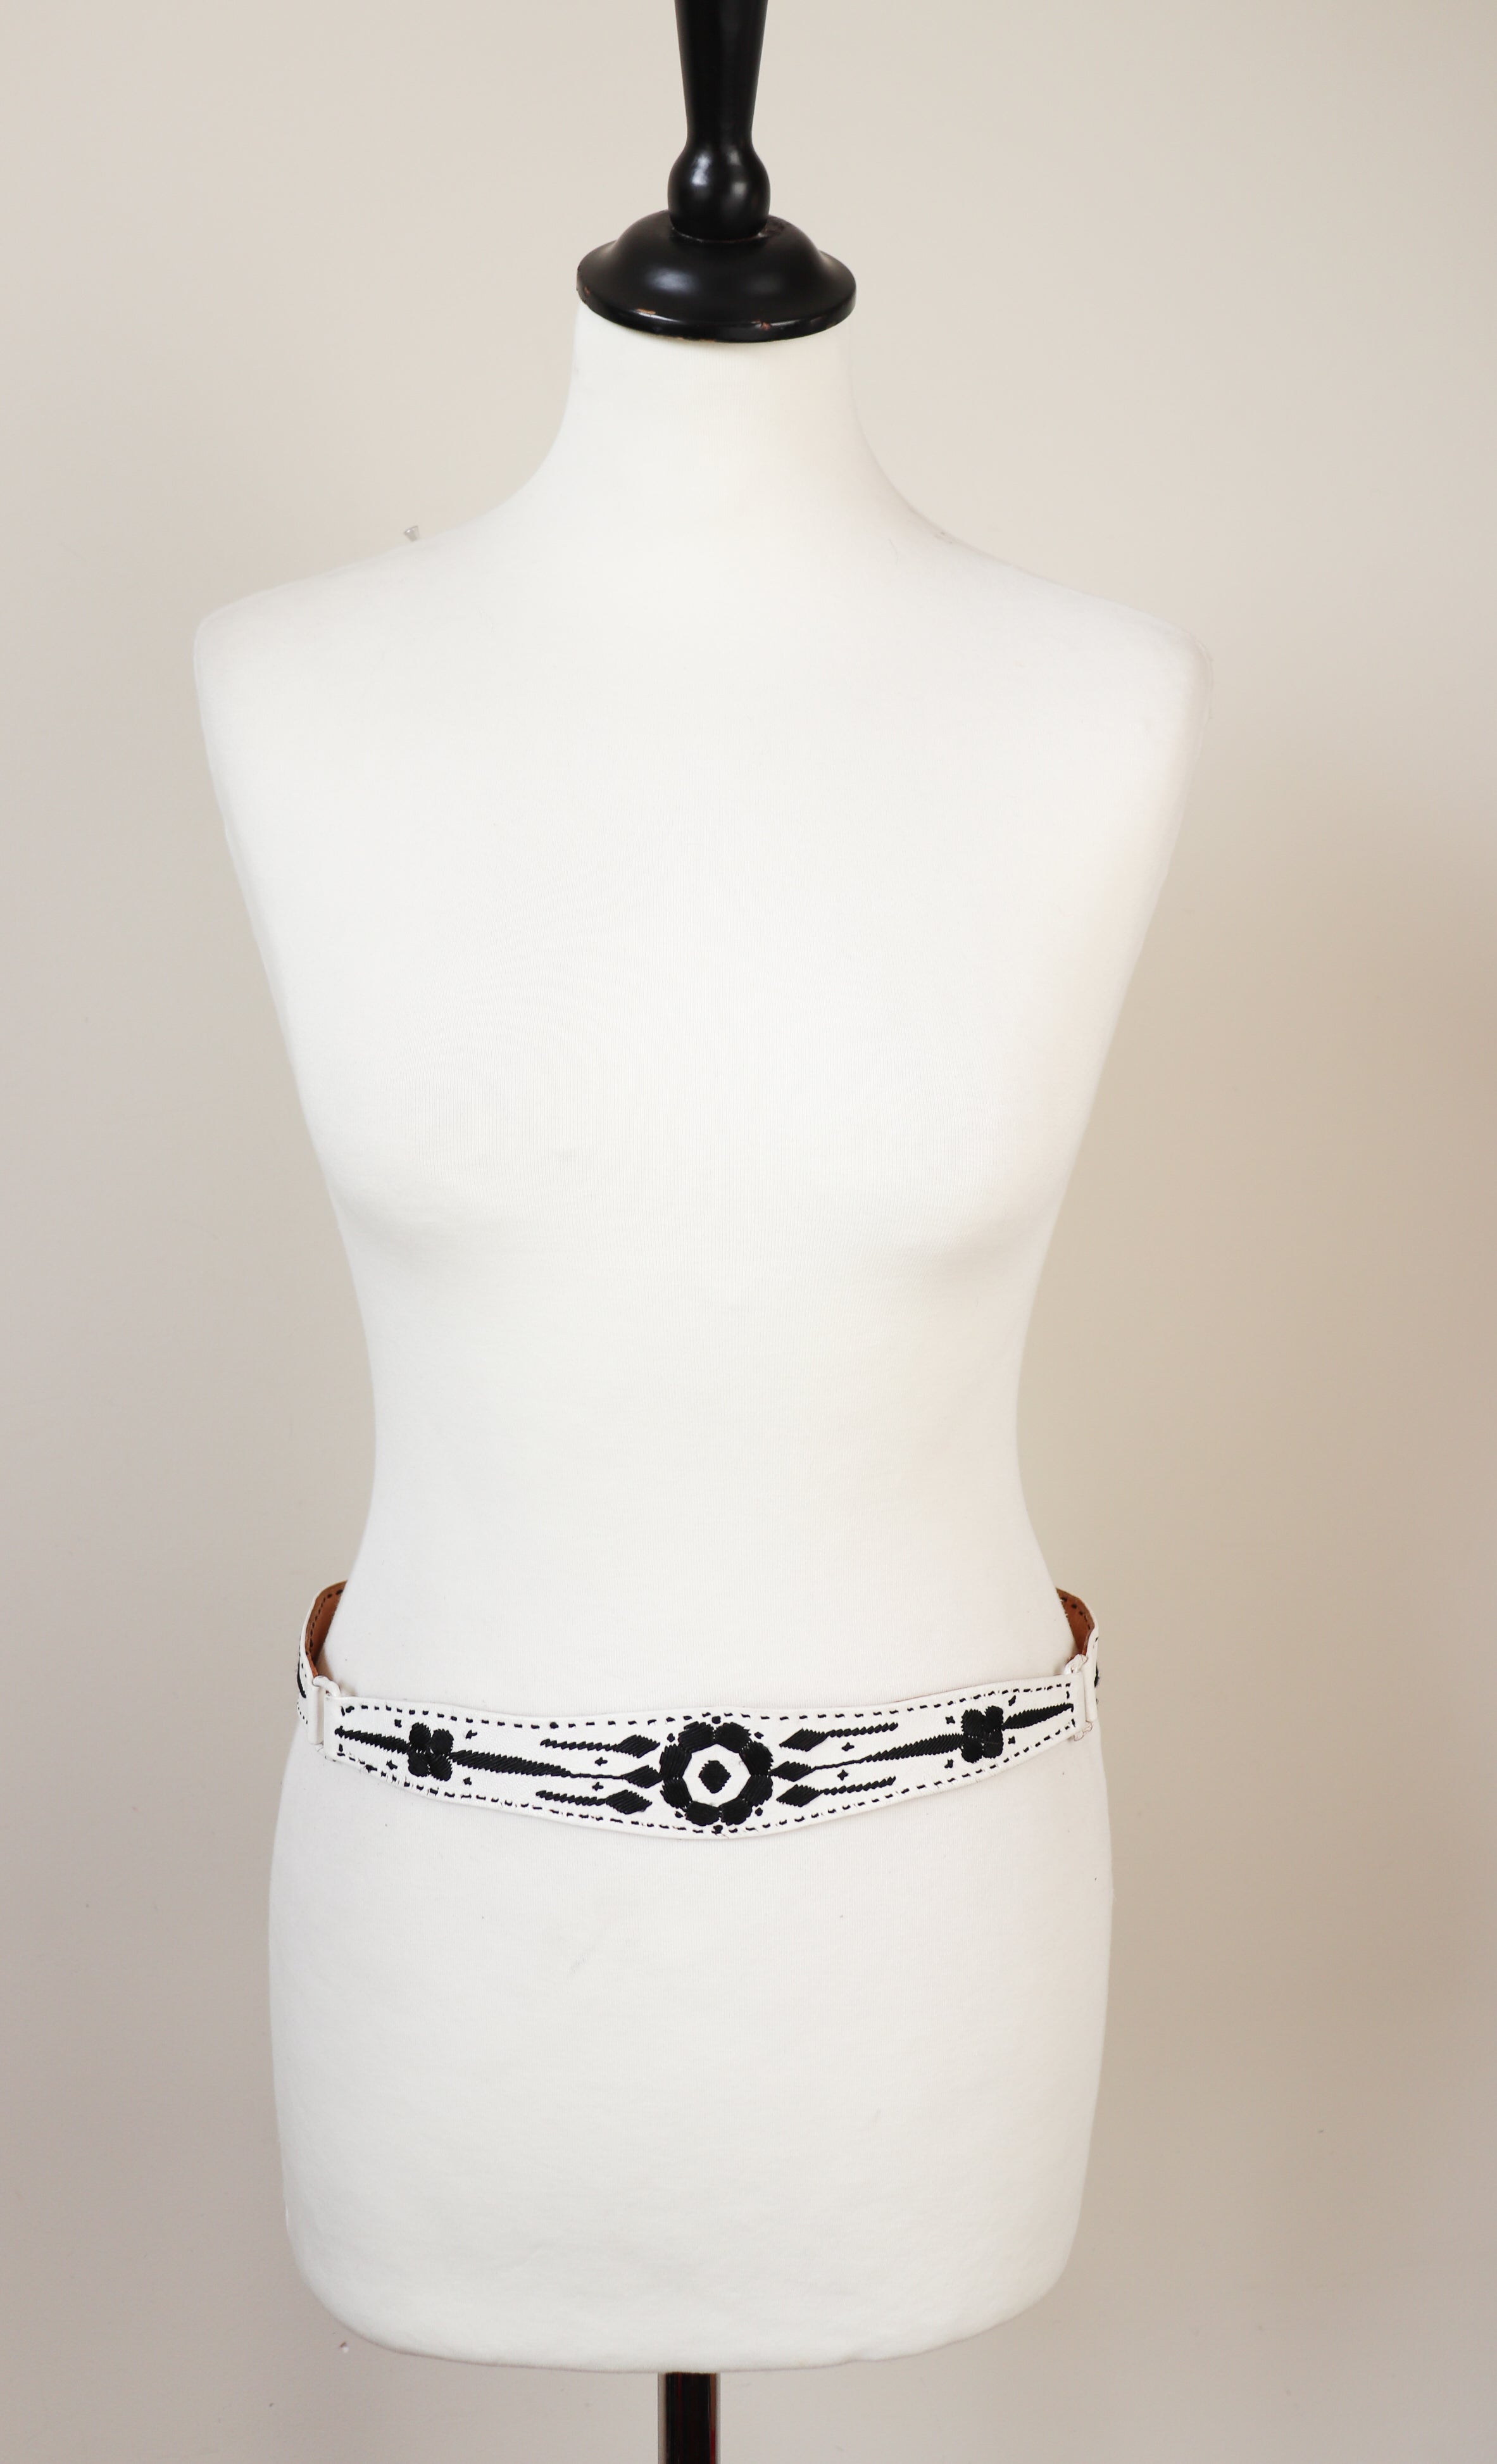 White Leather Handmade Vintage Belt - Black Embroidery - XS / S